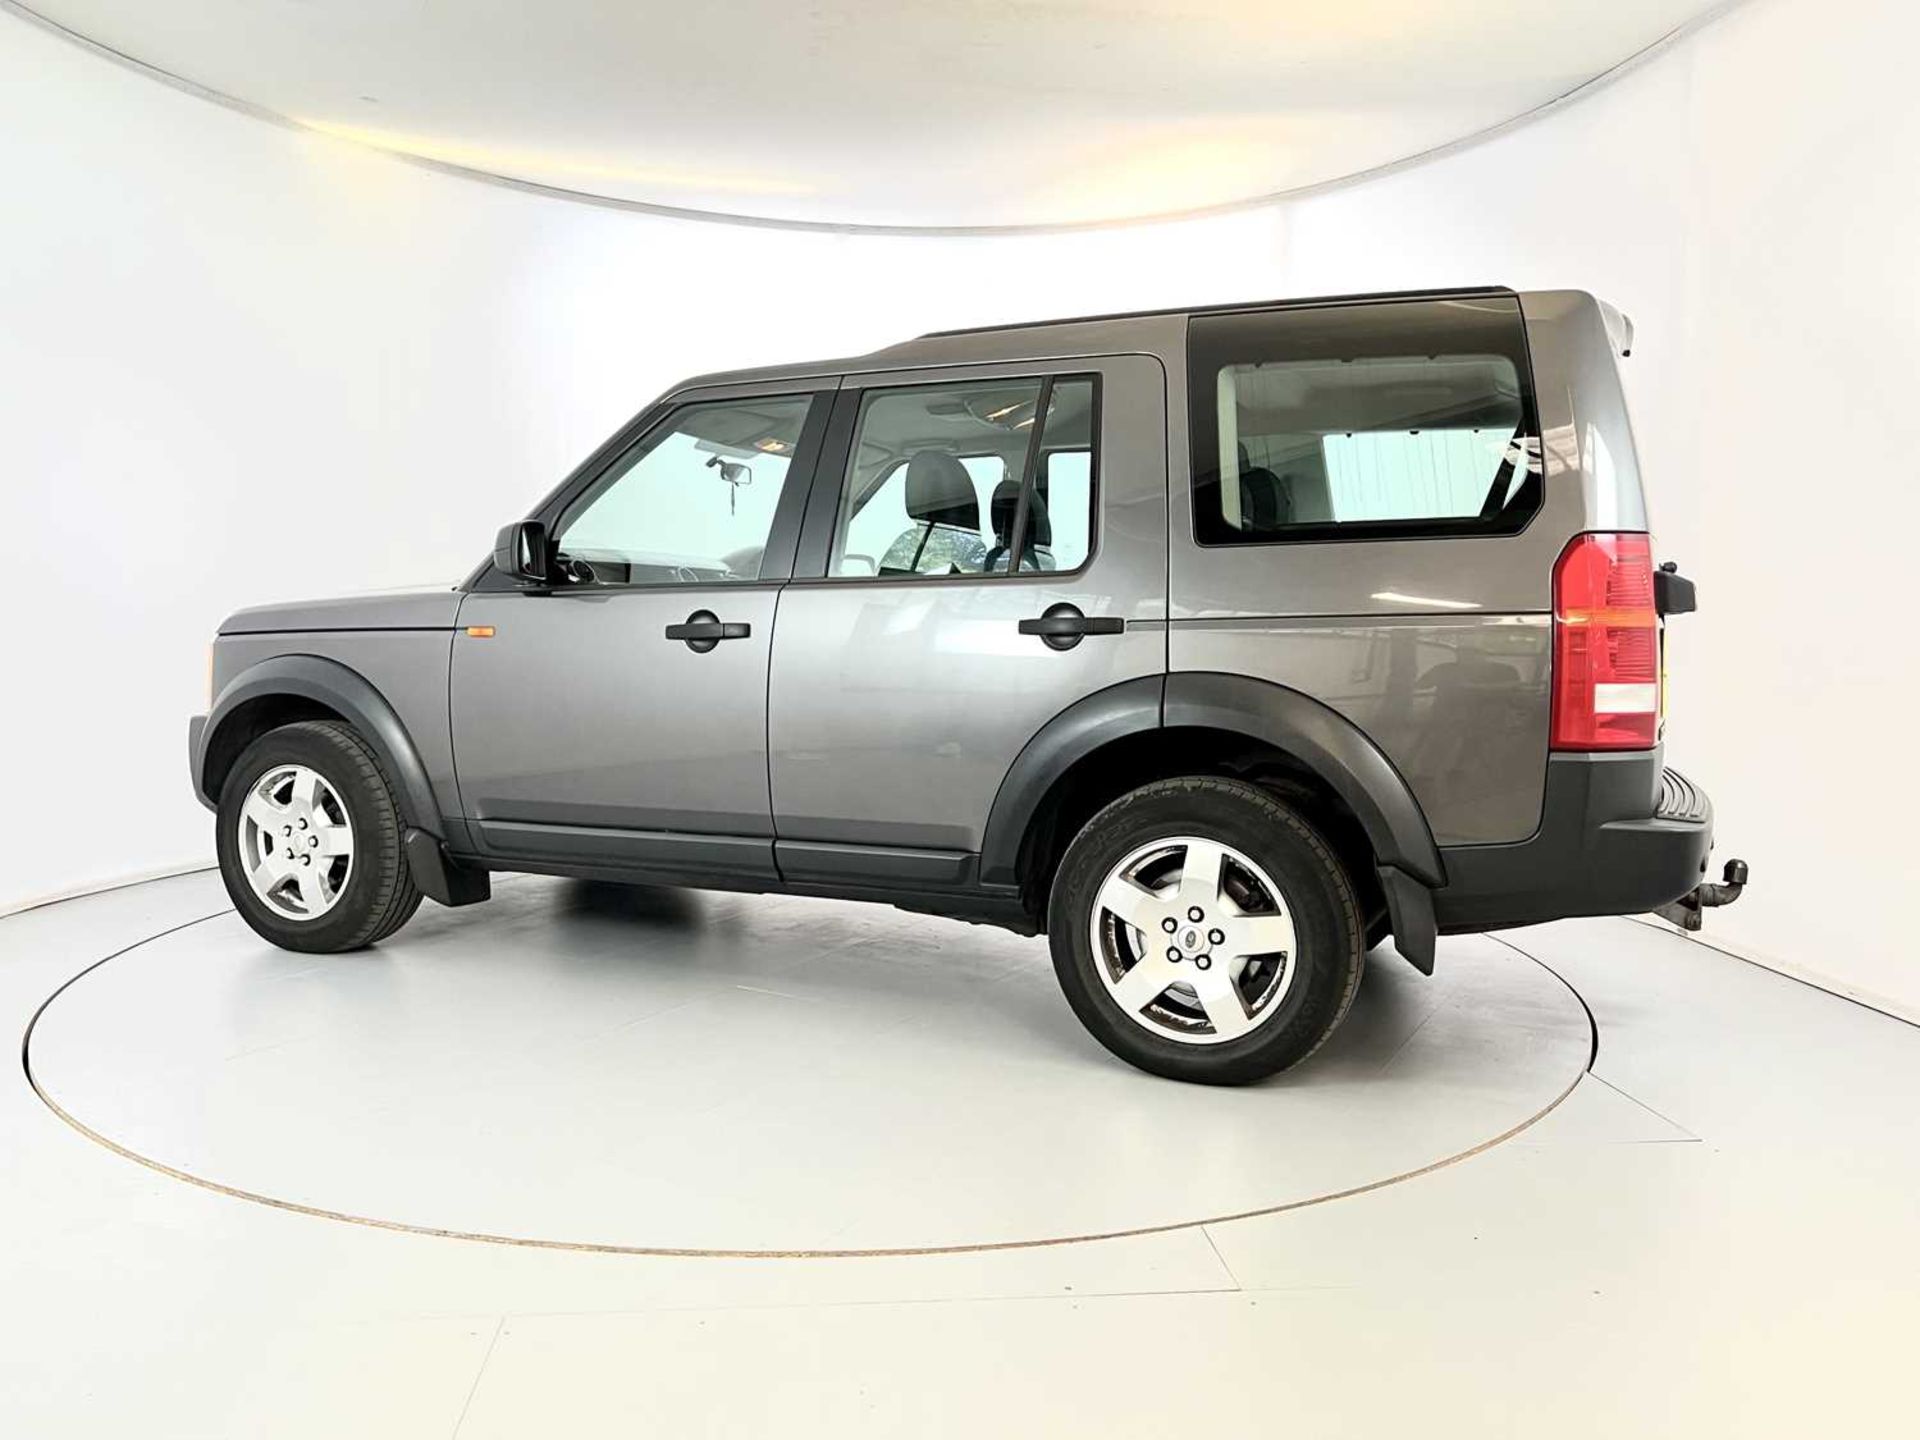 2005 Land Rover Discovery - Image 6 of 36